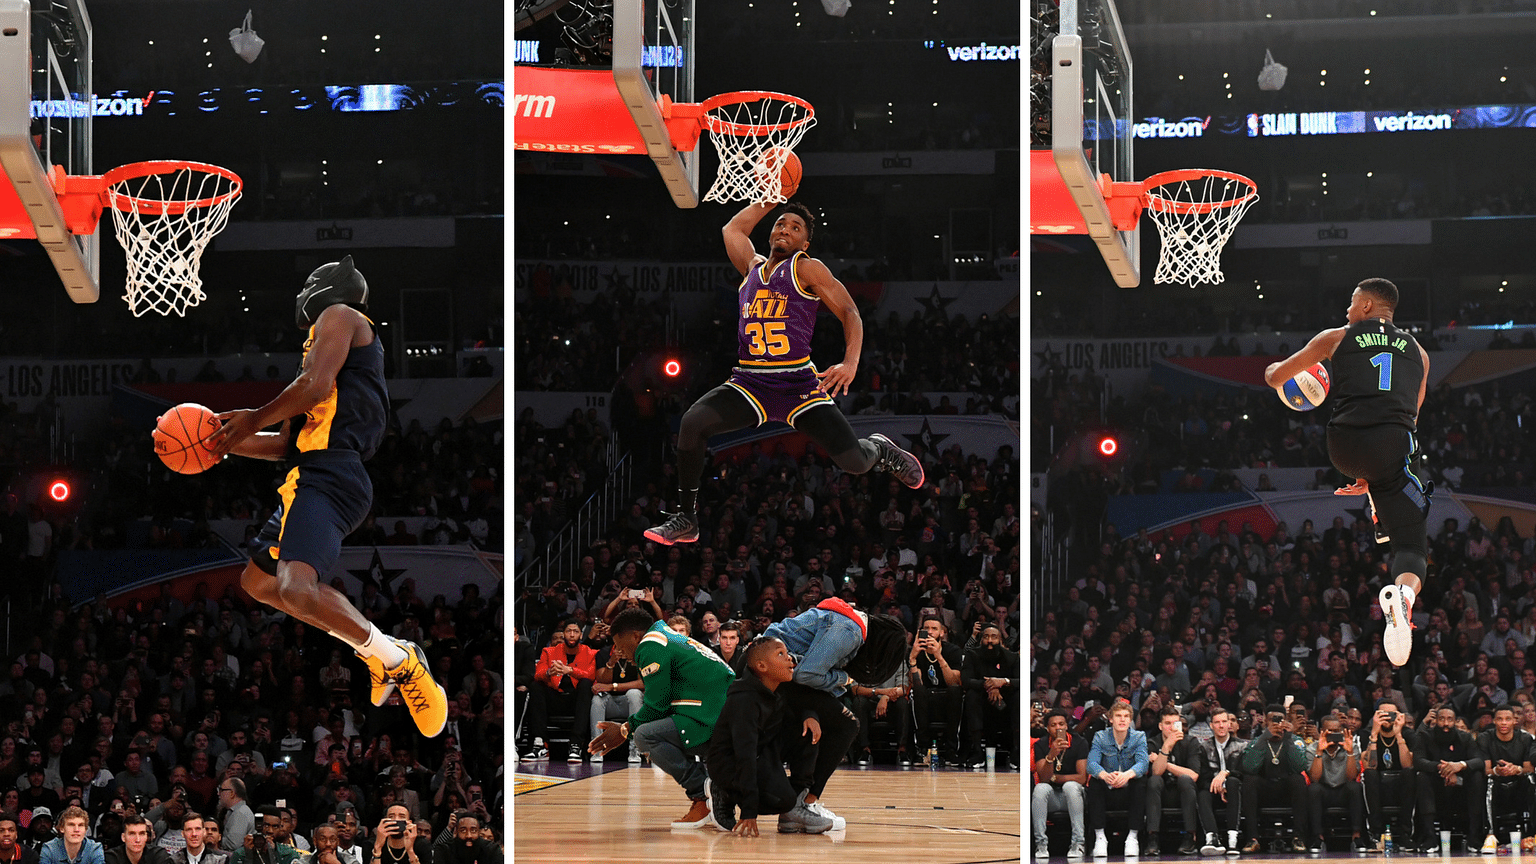 Action from the NBA All Star slam dunk contest on Saturday.